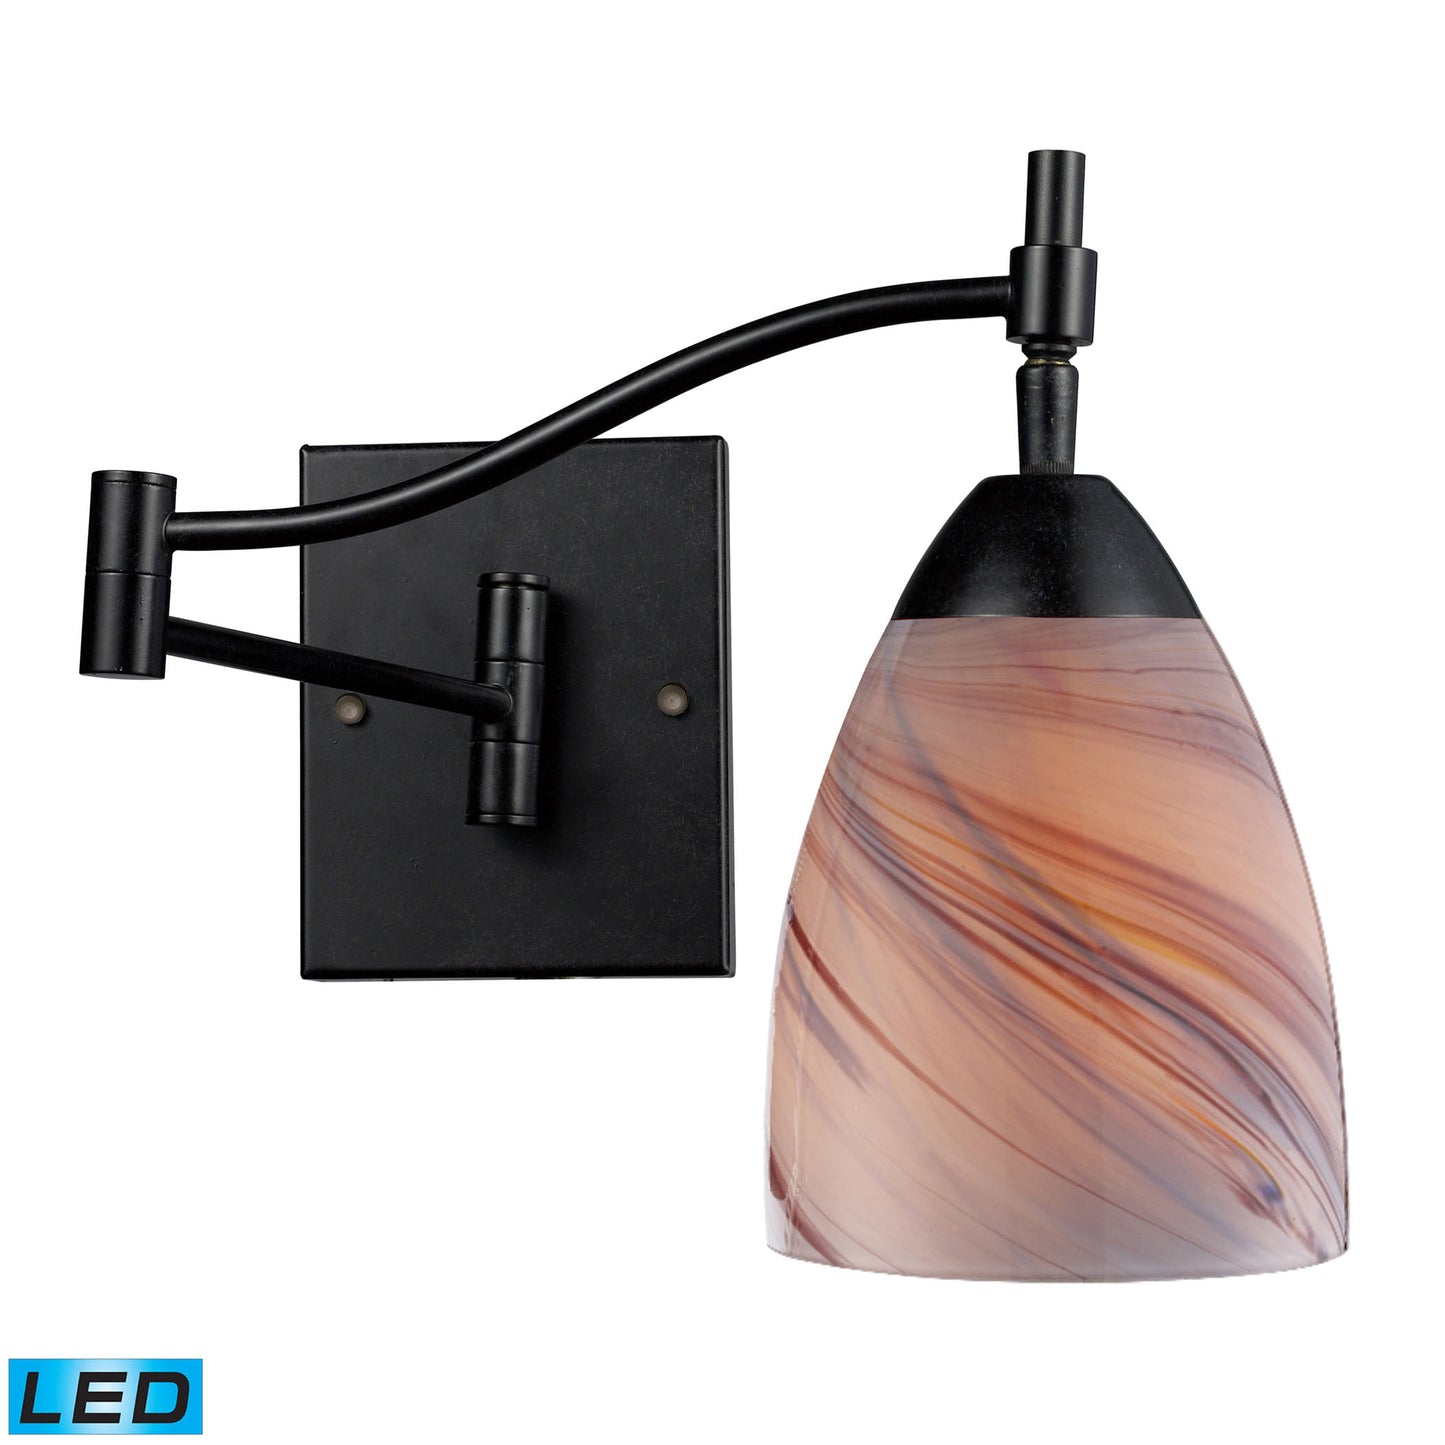 Celina 1-Light Swingarm Wall Lamp in Dark Rust with Creme Glass - Includes LED Bulb